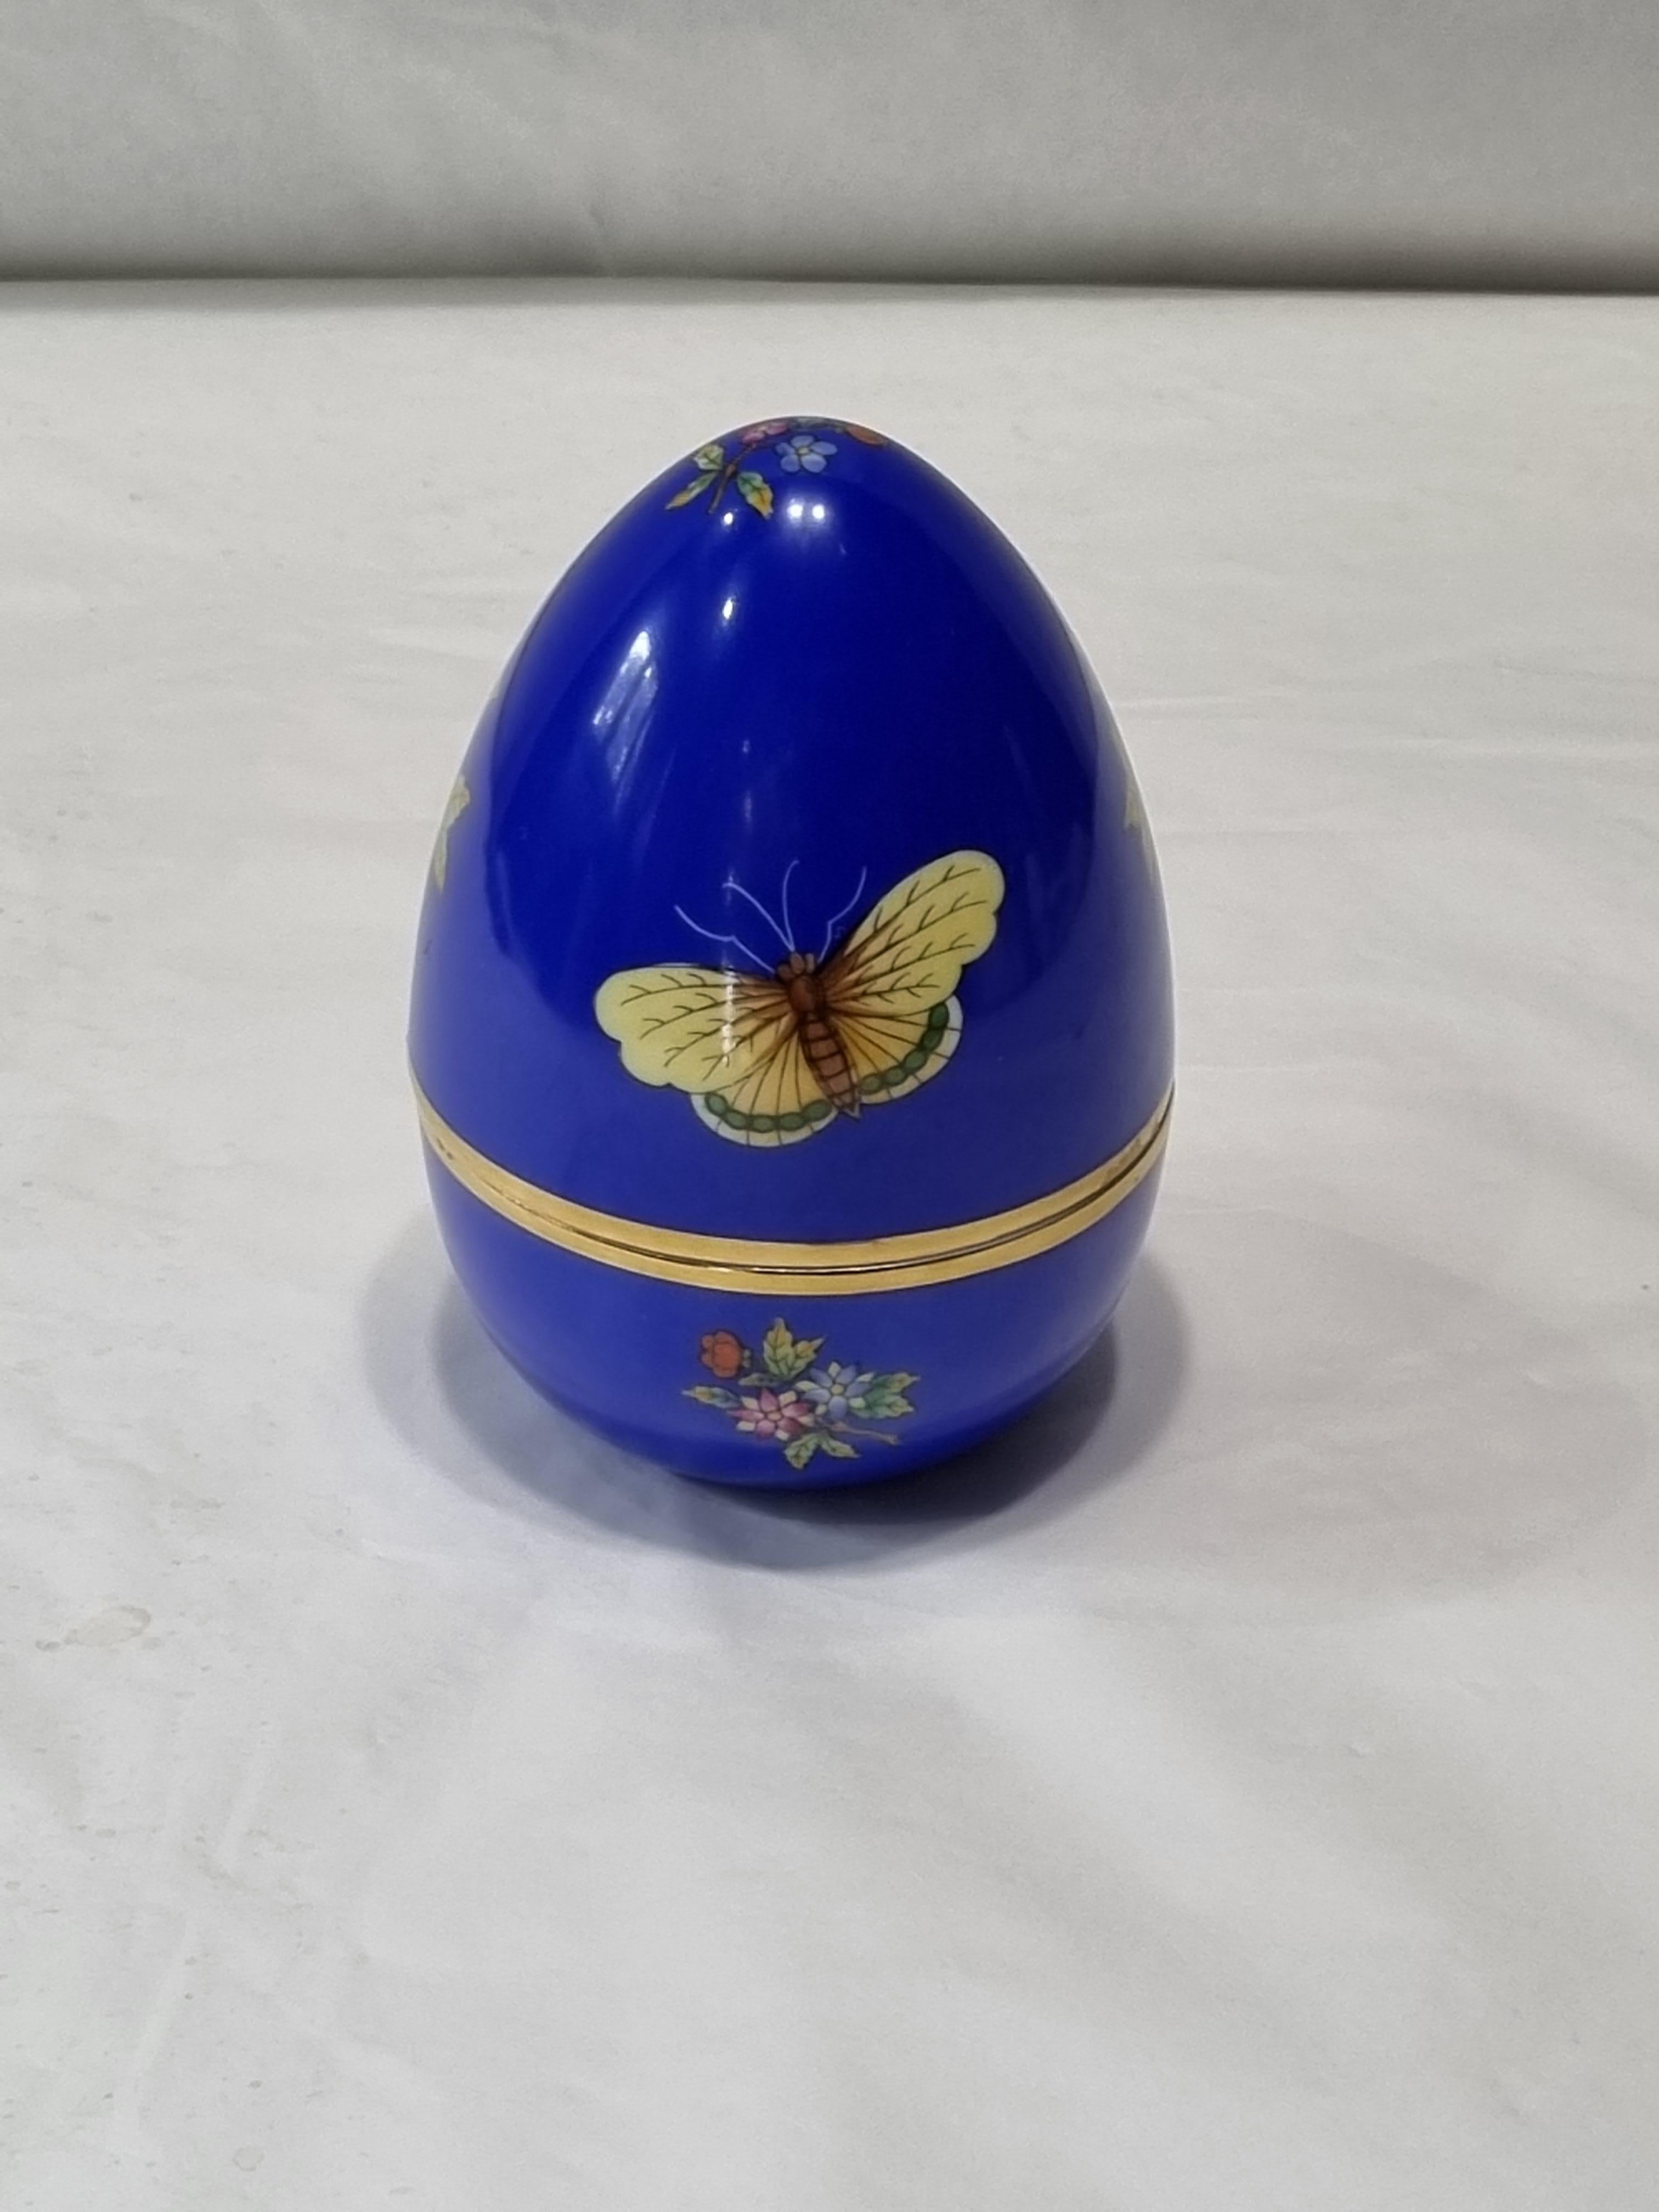 Stylish egg shaped box in Hungarian porcelain hand painted with flowers and butterflies decoration, multi-color, on a blue background.
The Victoria decor is one of the most important of Herend since it was chosen by the great Queen Victoria in 1851